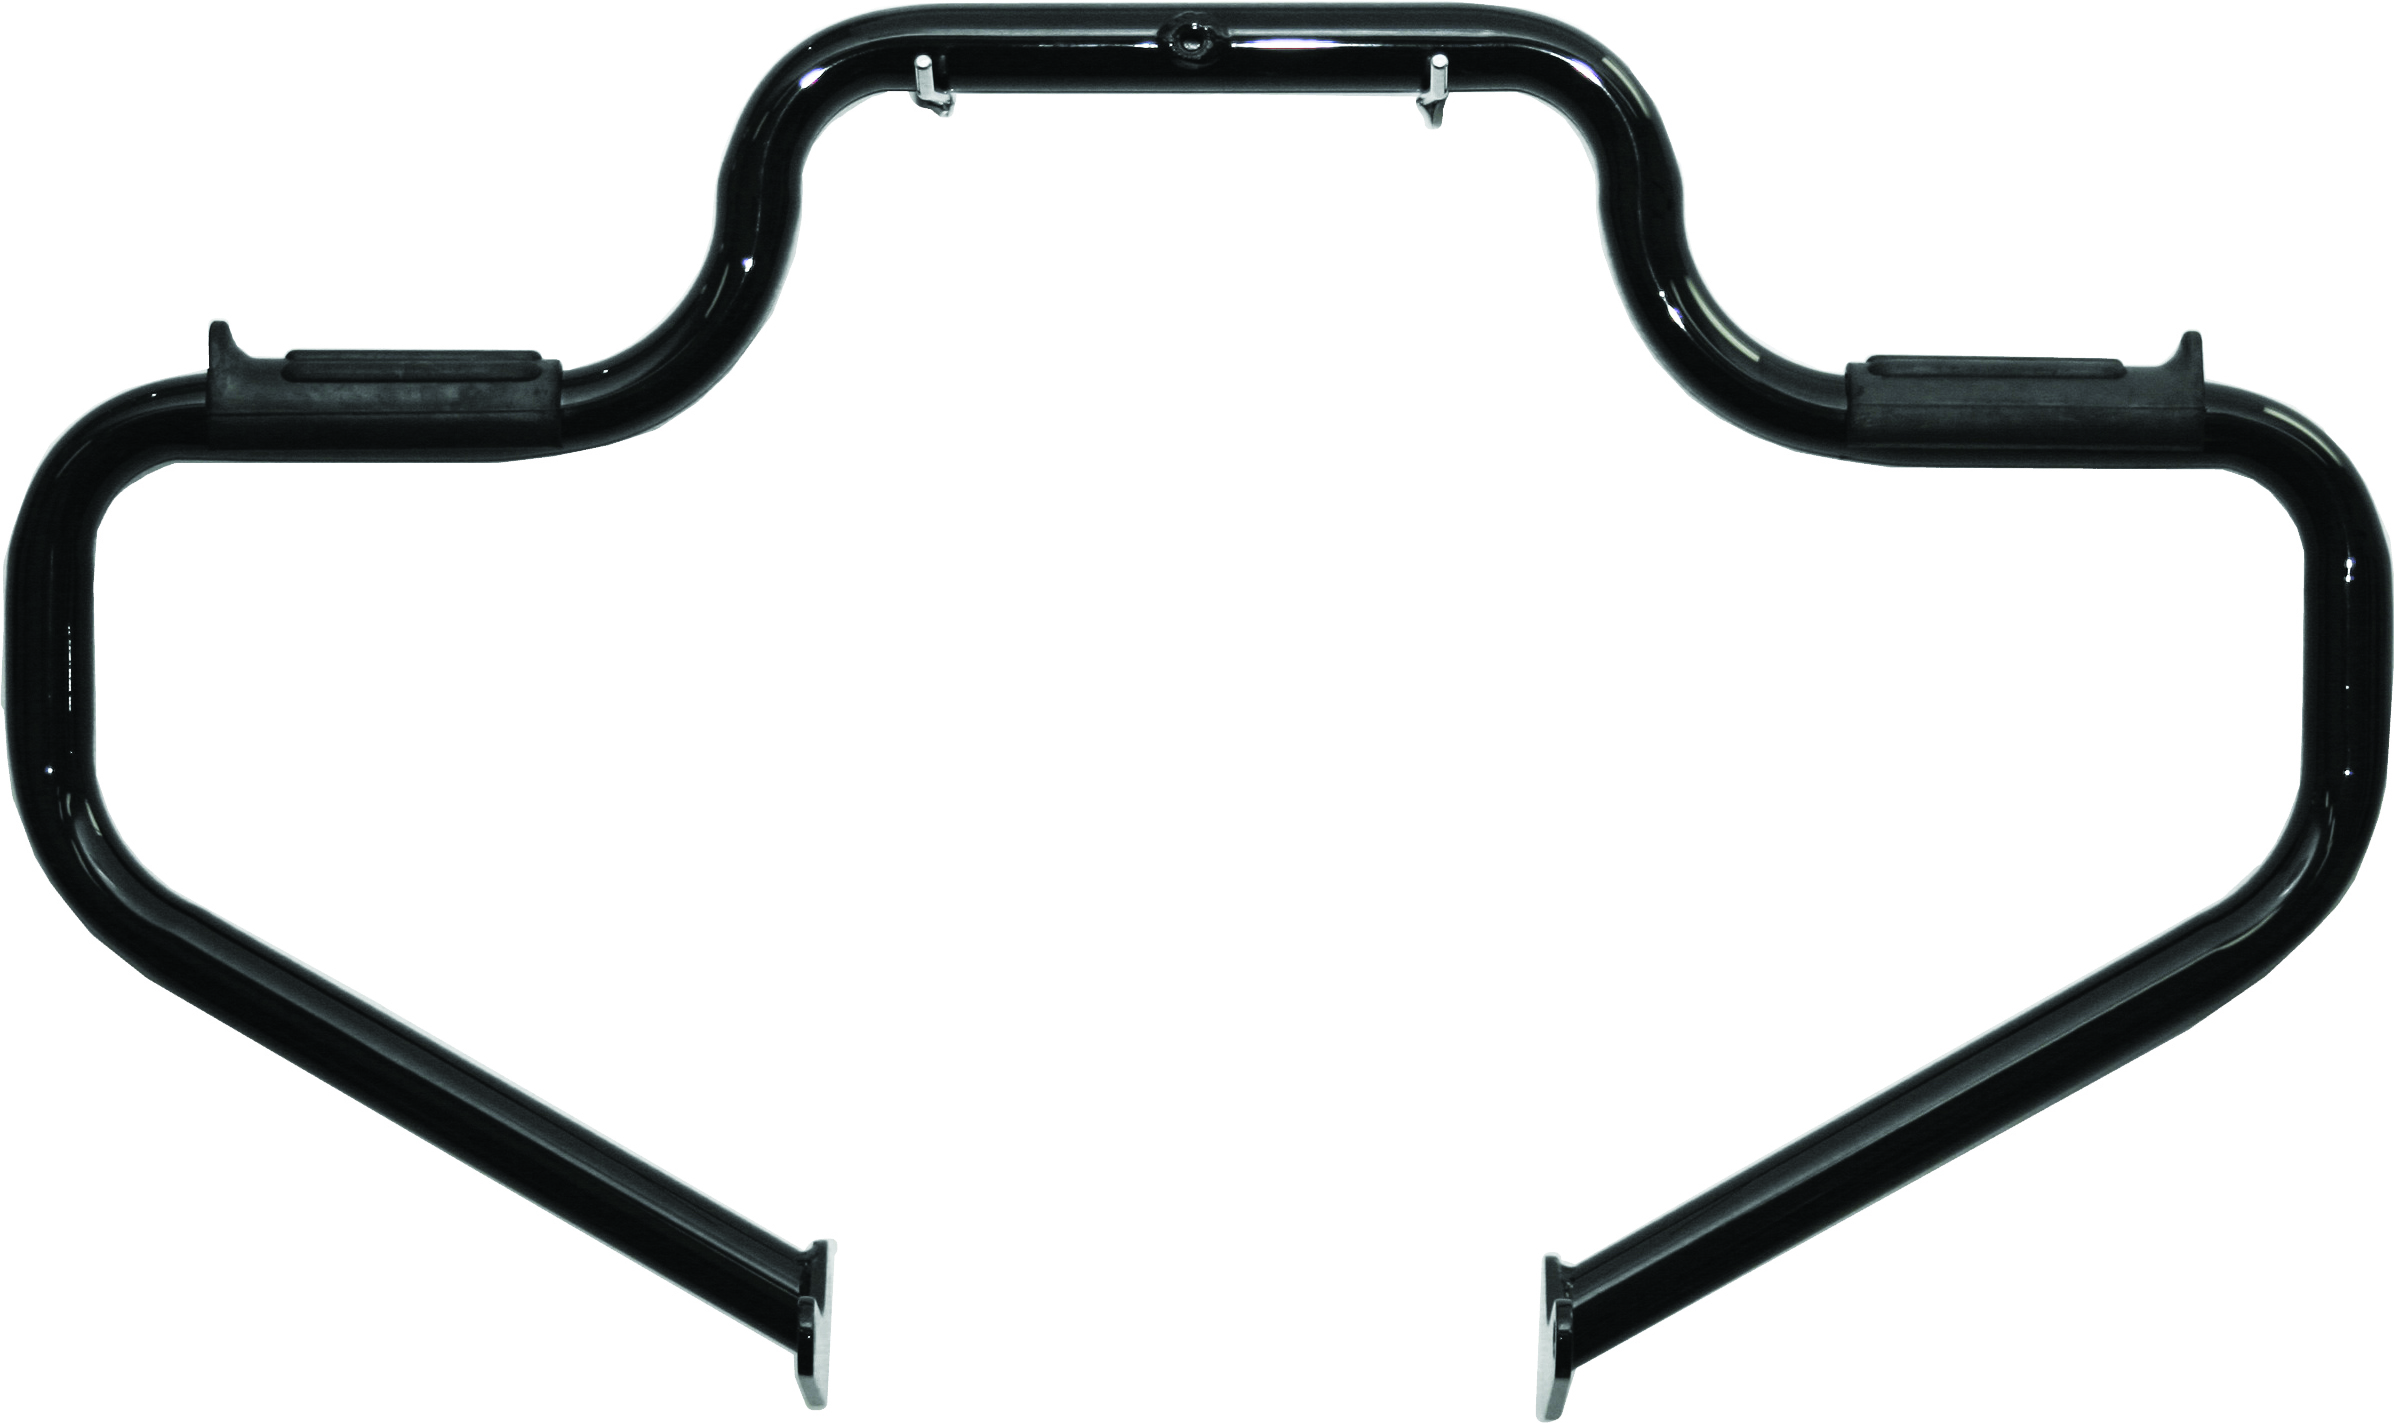 Multibar Engine Guard - Black - For 00-17 Harley Softail - Click Image to Close